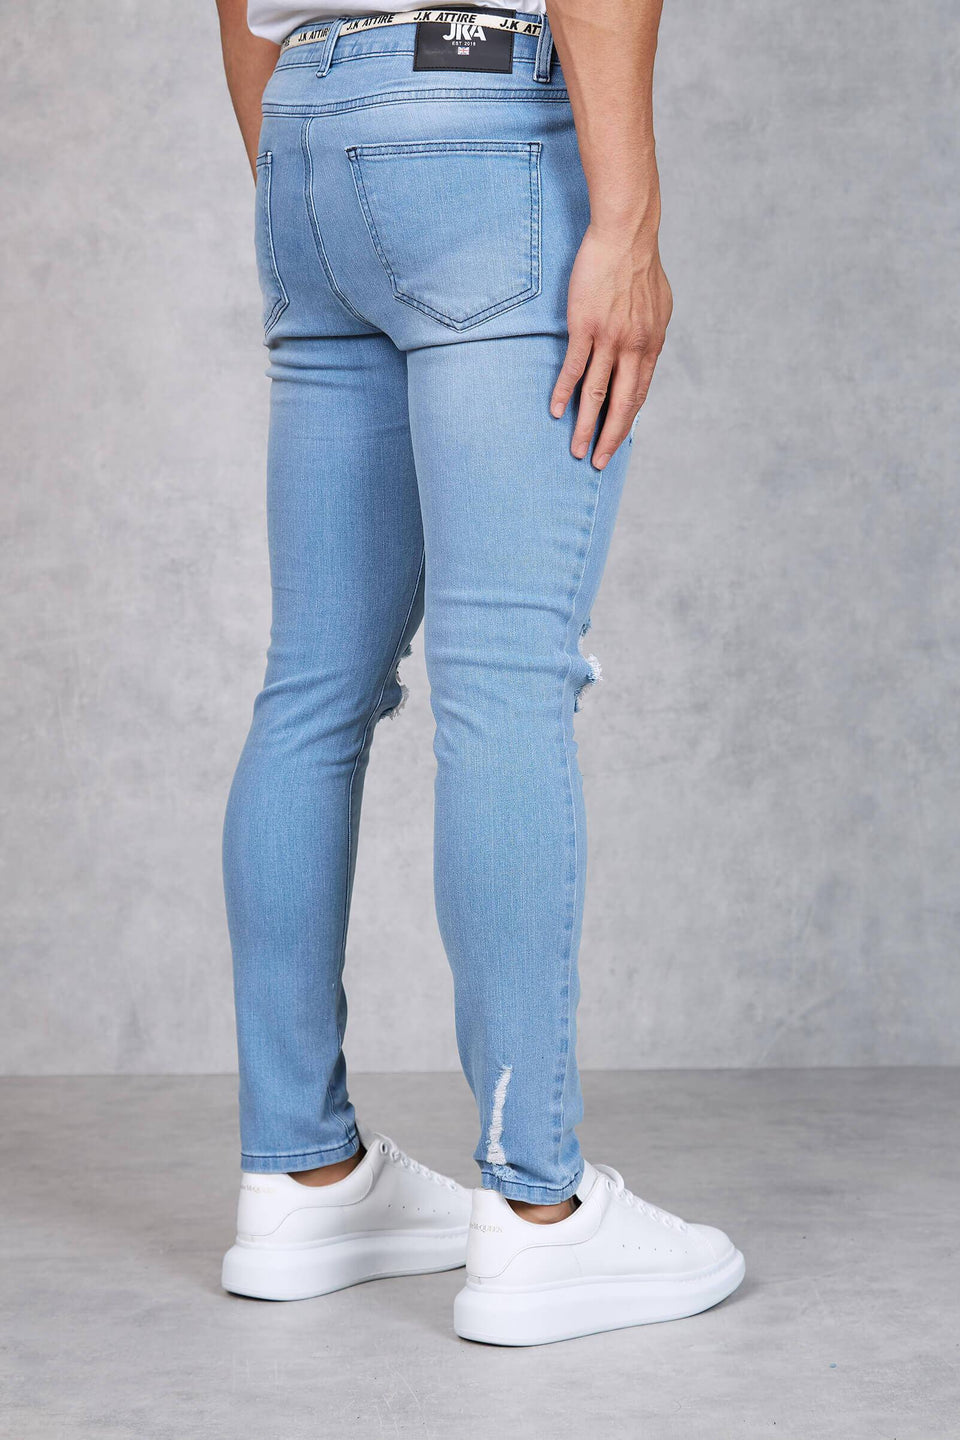 F2 - Caraway Dirty Wash Distressed Skinny Jeans - Light Blue